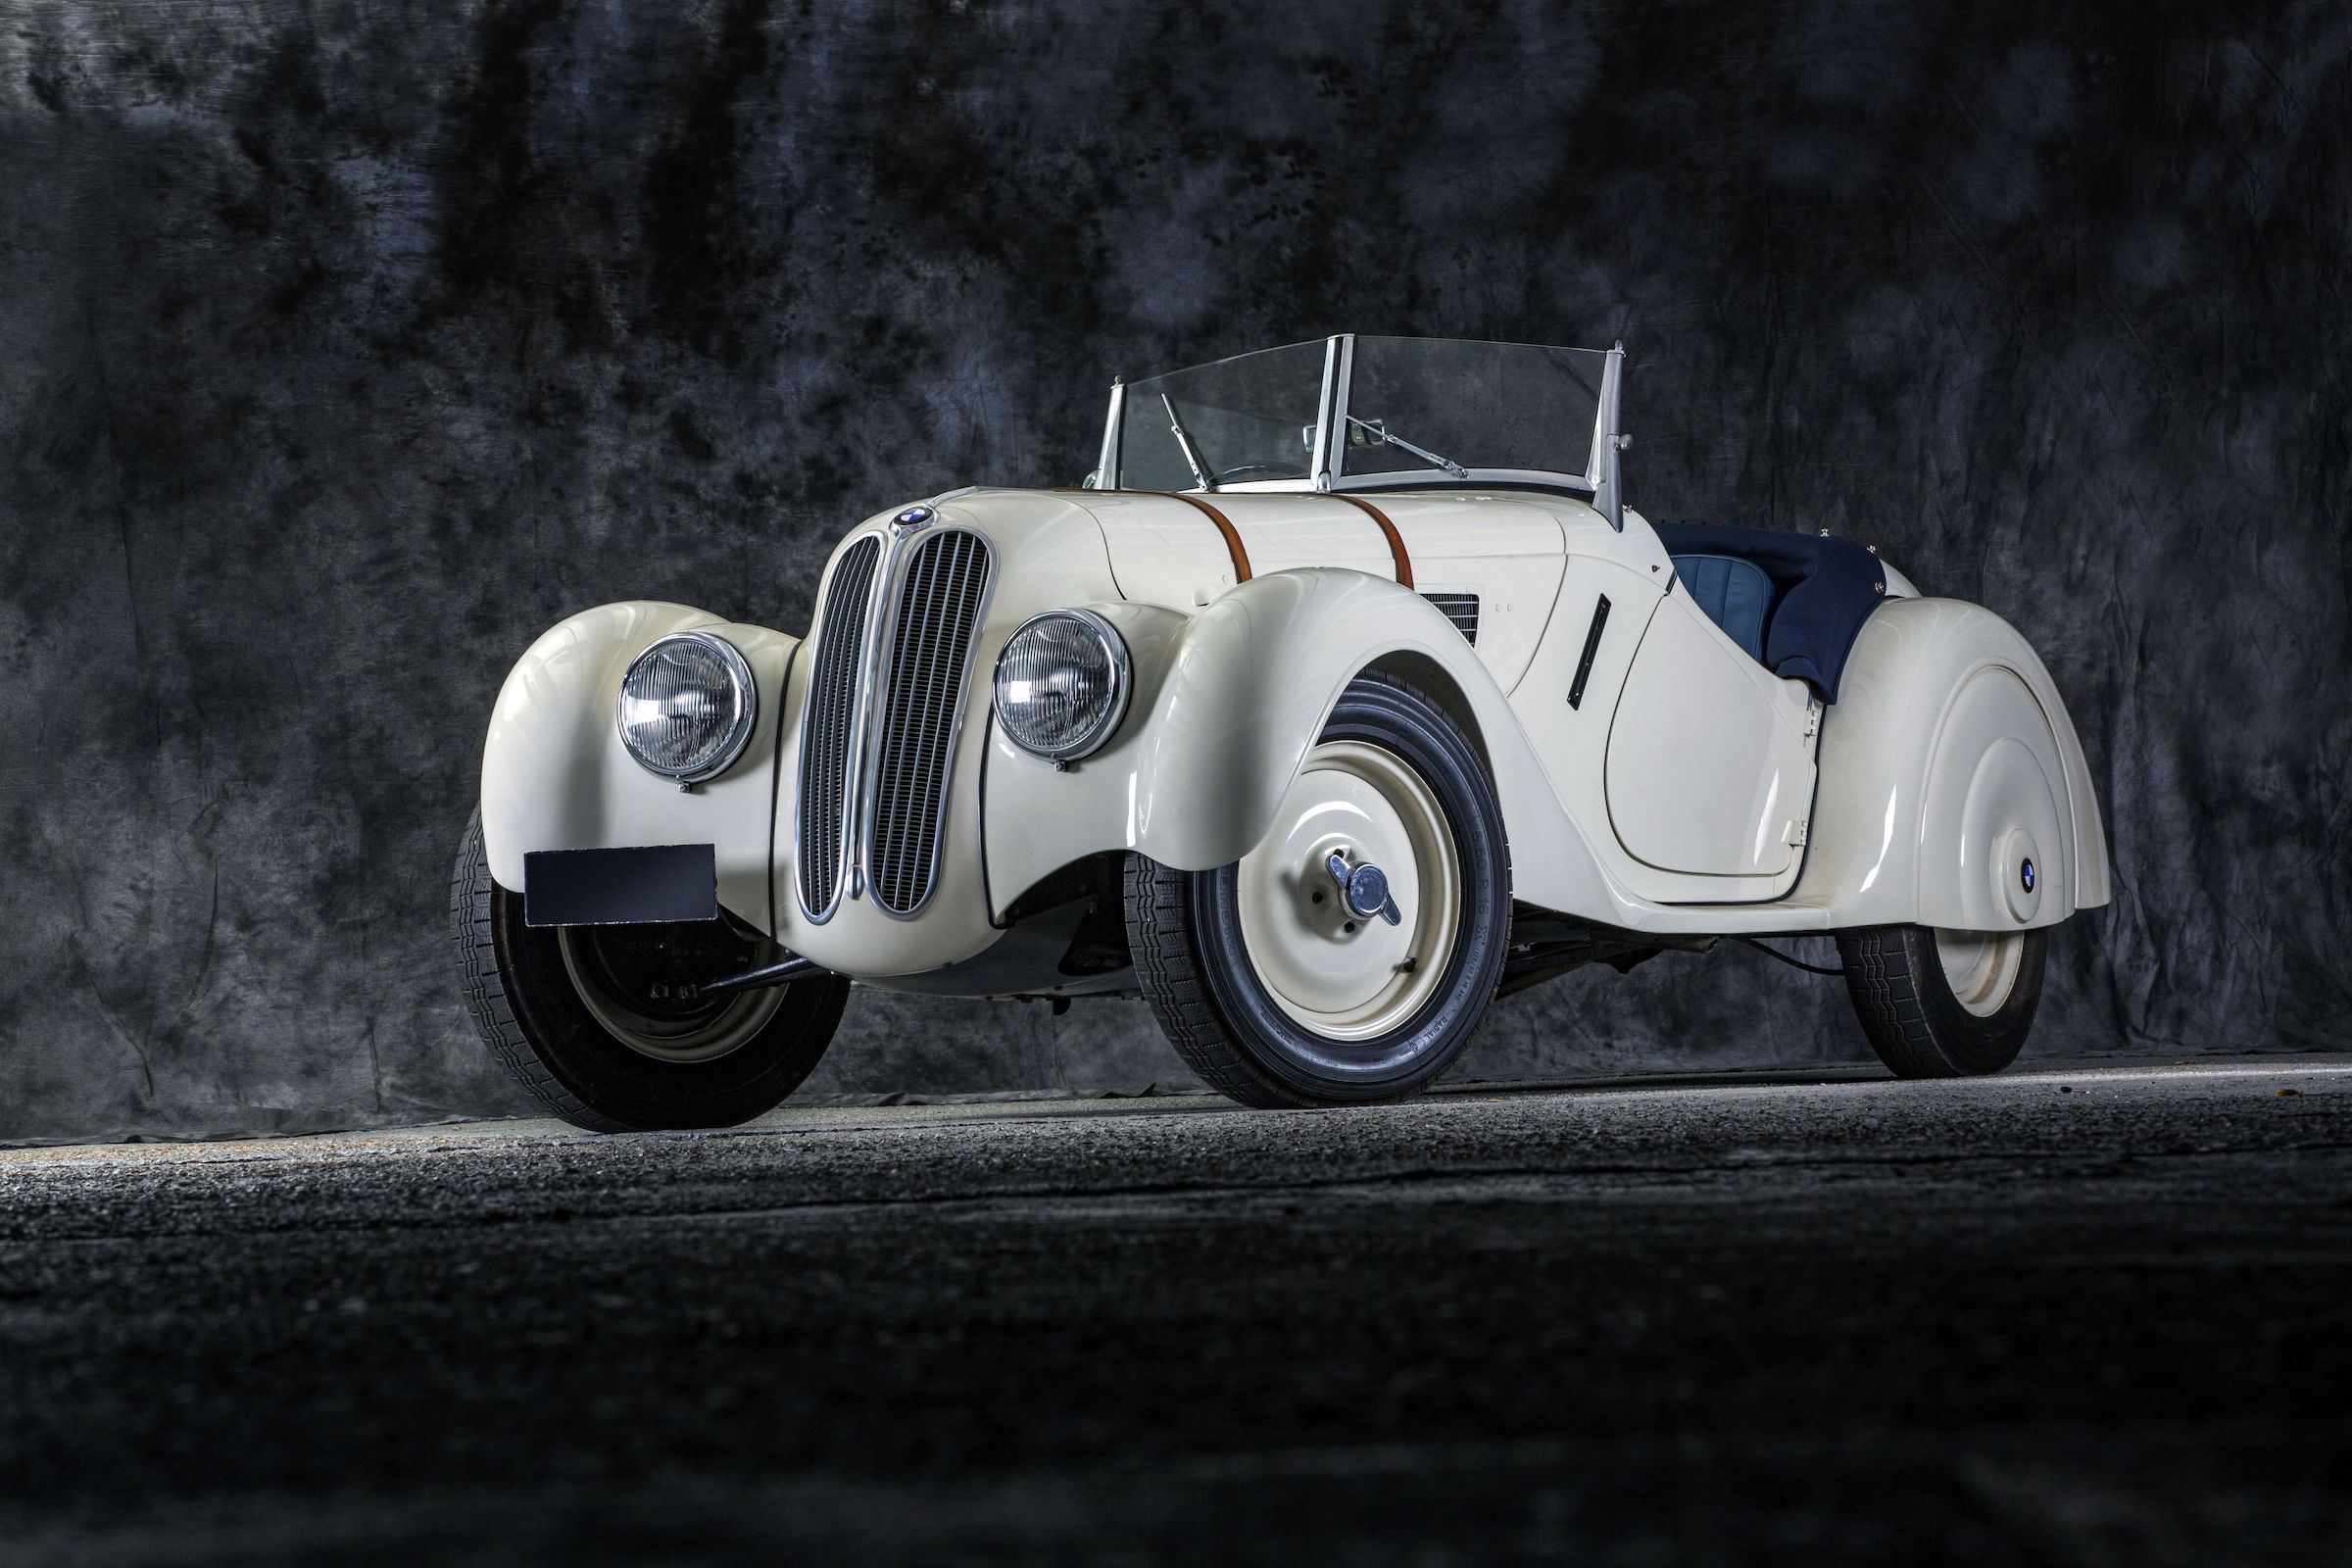 Nine stunning classics at the Artcurial Le Mans Classic auction